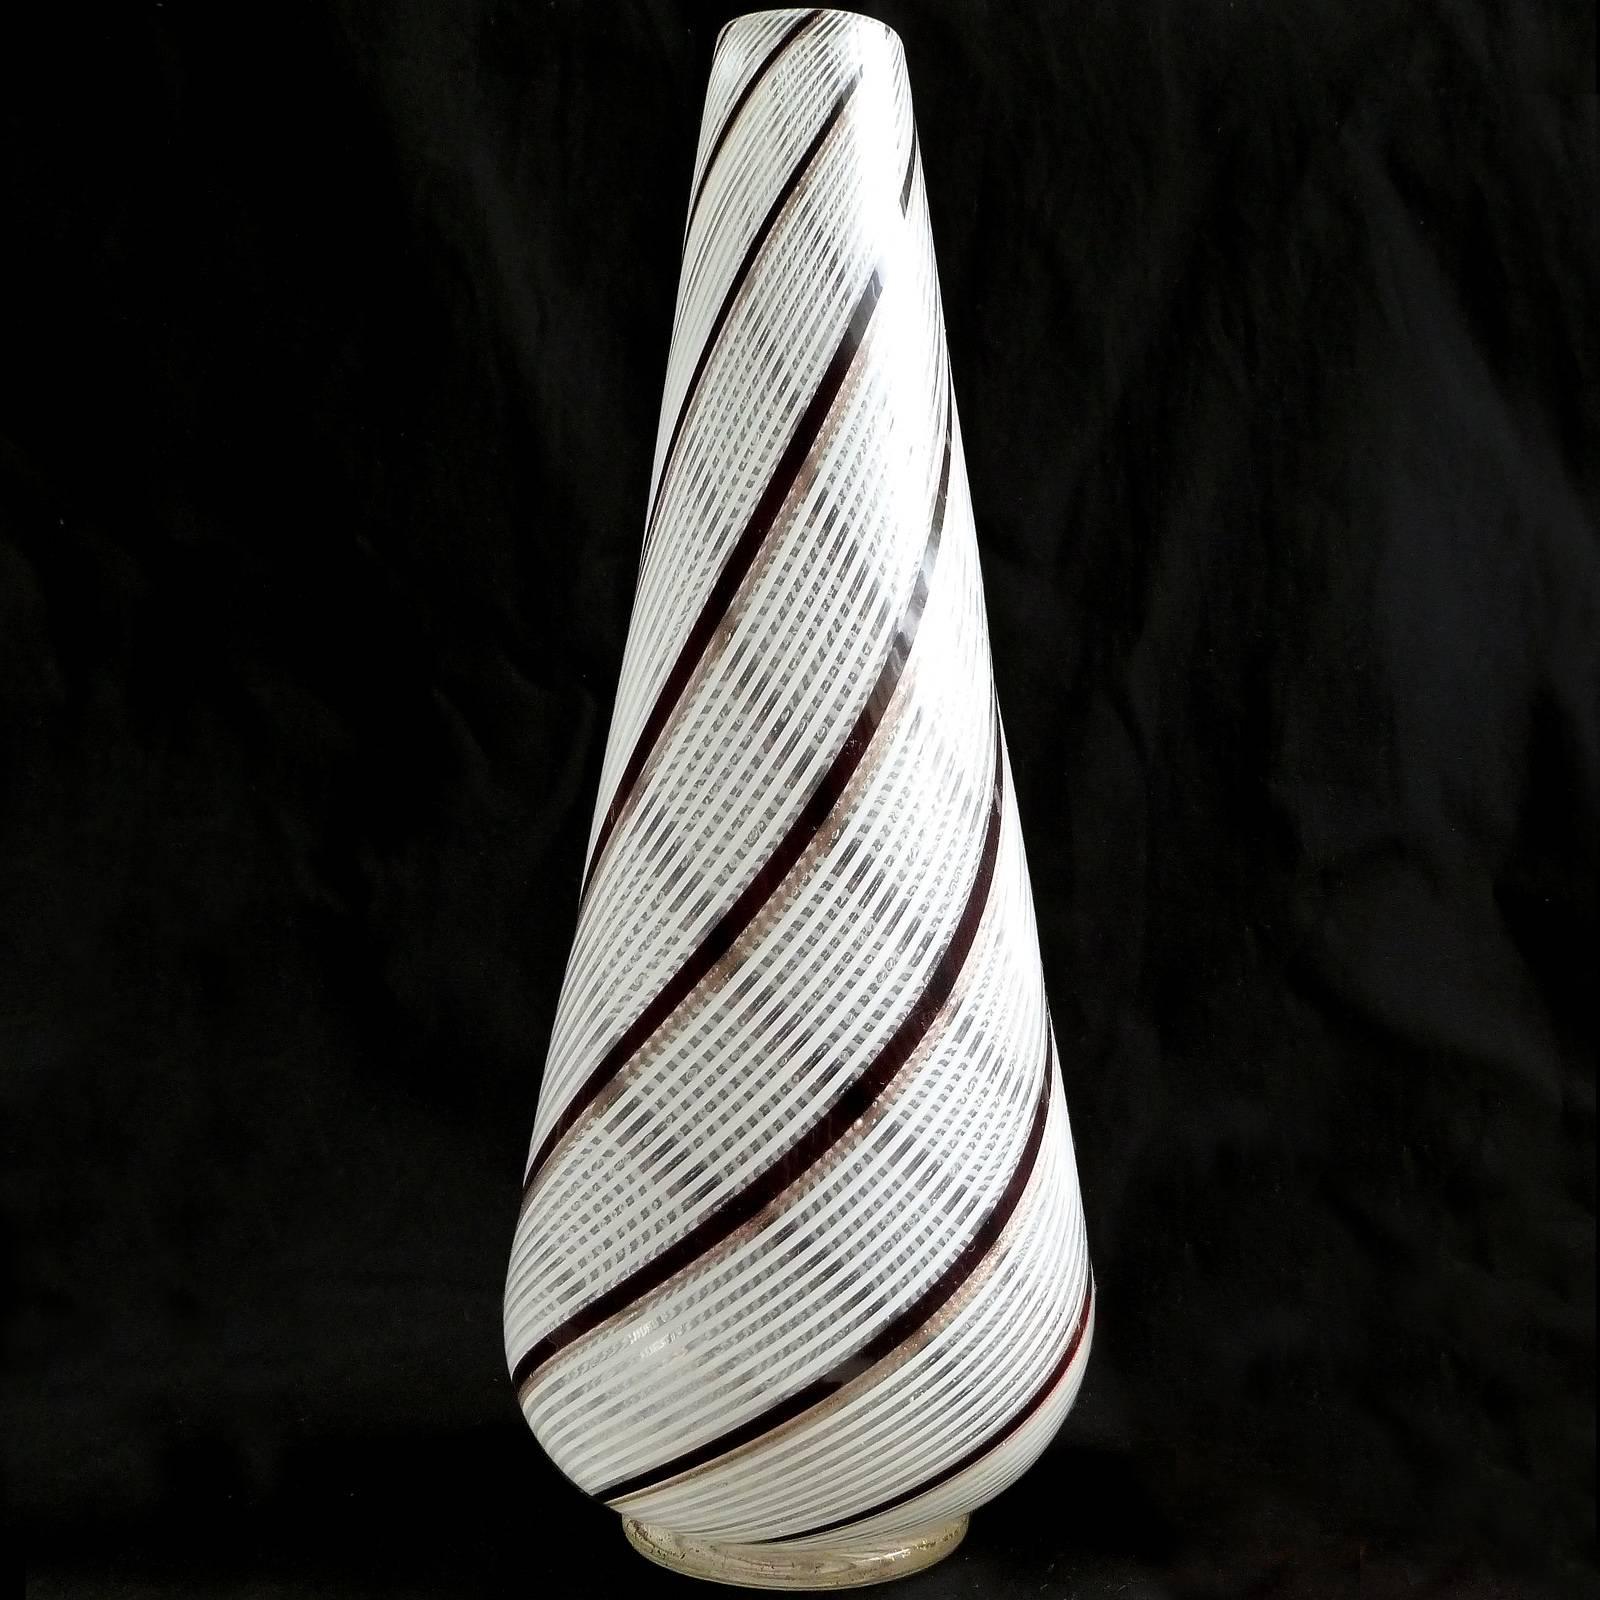 Beautiful Murano handblown filigrana white, black and aventurine flecks ribbons Italian art glass flower vase. Documented to designer Dino Martens, for Aureliano Toso. It still retains its original label underneath. It rests on a glass disk with